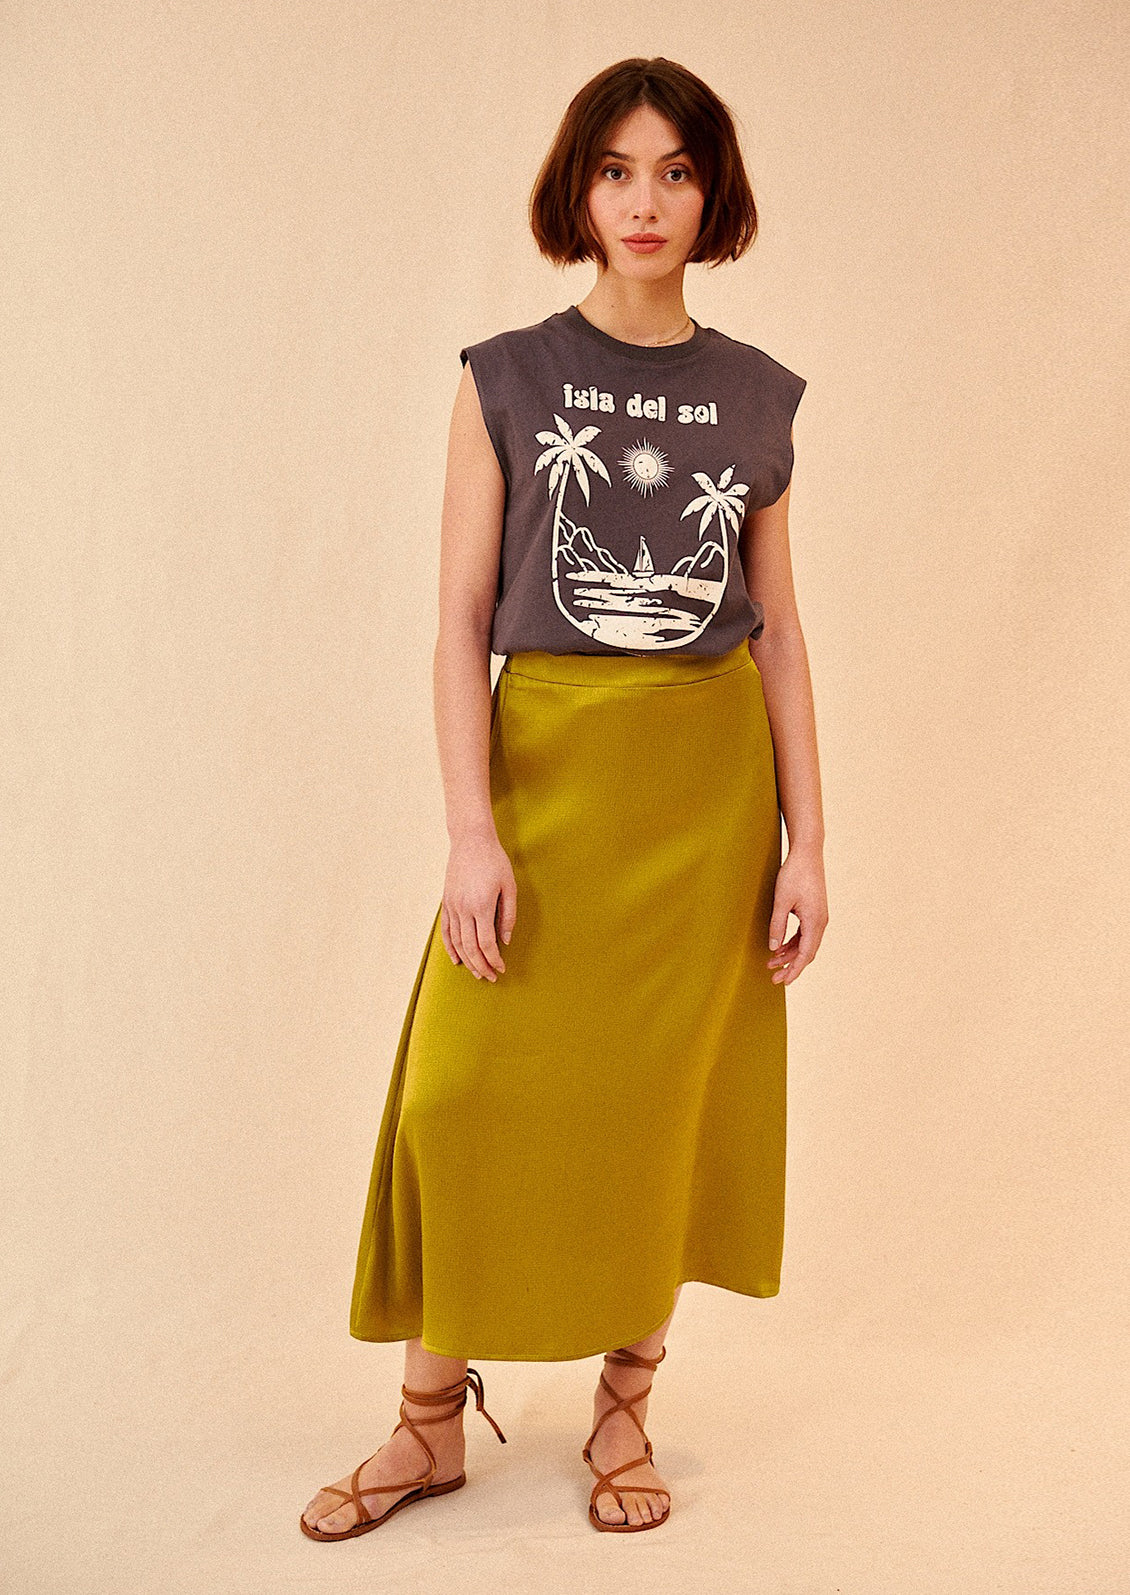 Woman wearing olive green midi skirt, t-shirt, and sandals. 